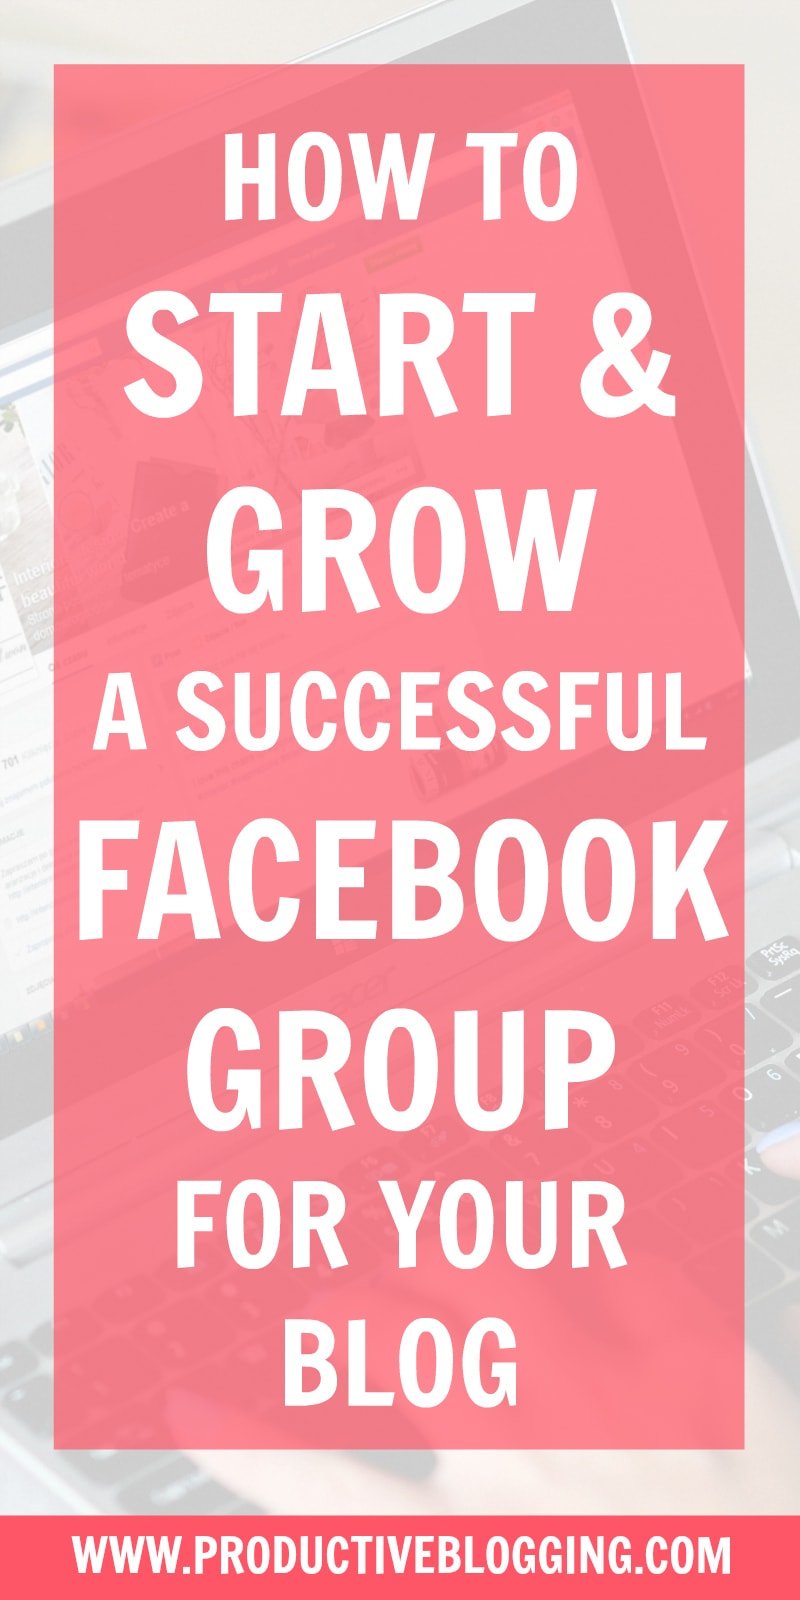 1.4 billion people participate in Facebook Groups every month. Here’s how to harness the power of Facebook groups to grow your blog traffic and income. (Spoiler alert, it’s not by spamming your group with ‘read my blog post’ and ‘buy my products’ messages!) #facebookgroup #facebookgroups #successfulfacebookgroup #facebookgrouptips #facebookcommunity #facebooktribe #growyourtribe #growyourblog #bloggrowth #bloggrowthhacks #bloggingtips #blogginghacks #blogging #bloggers #productiveblogging